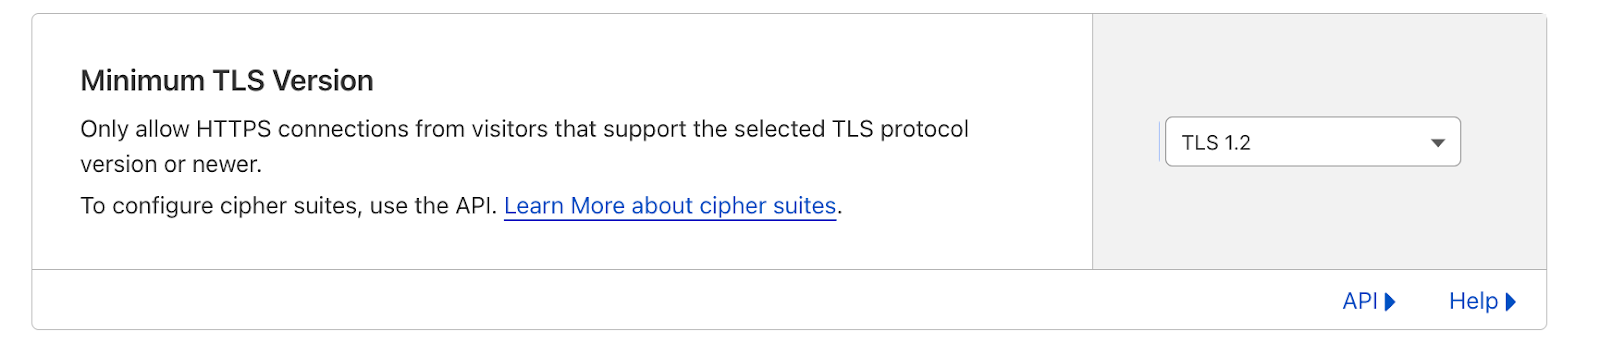 Introducing per hostname TLS settings — security fit to your needs